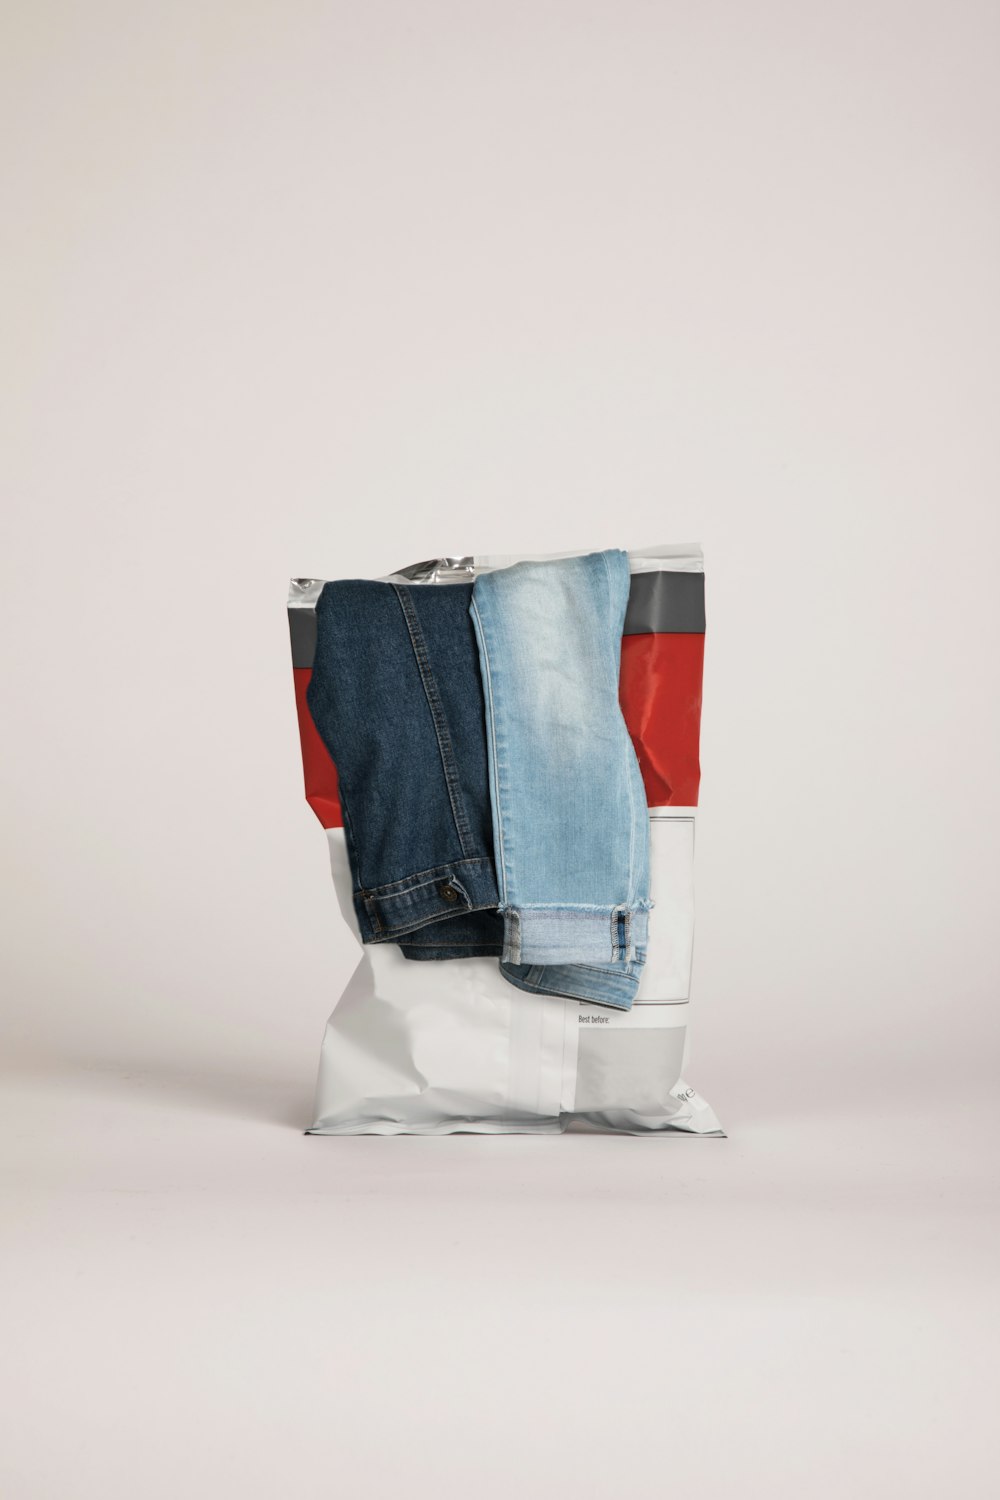 two blue and gray denim jeans on white plastic bag